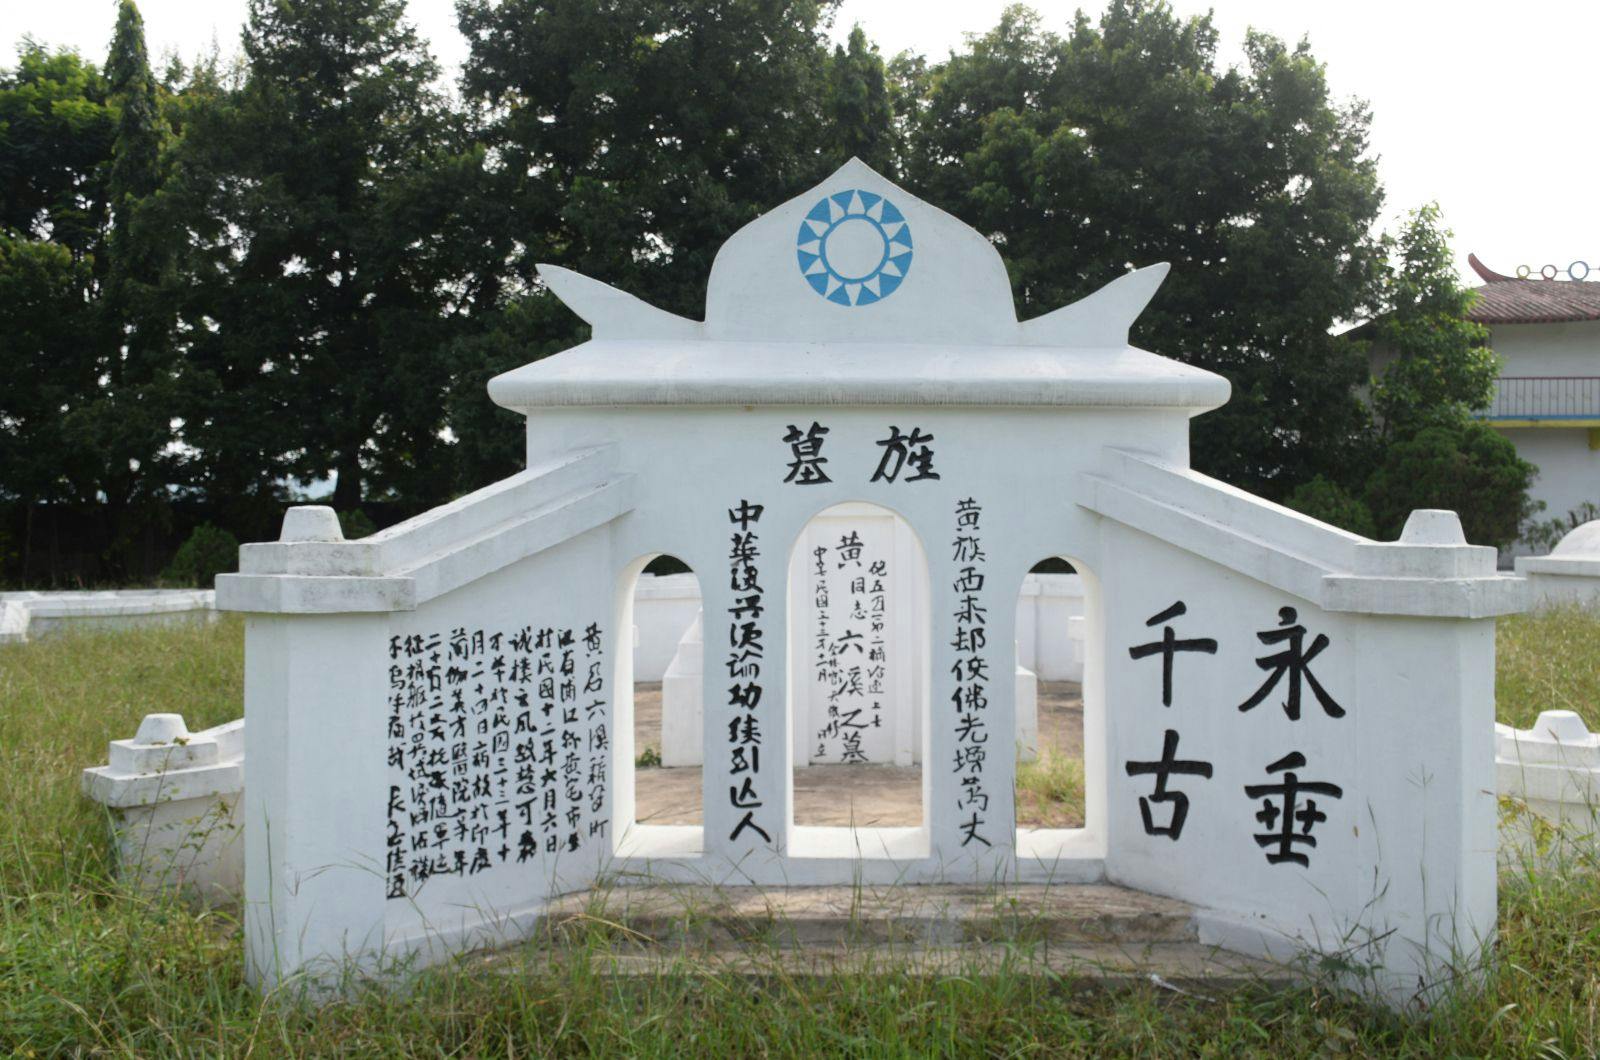 Freshly painted grave with description in Chinese